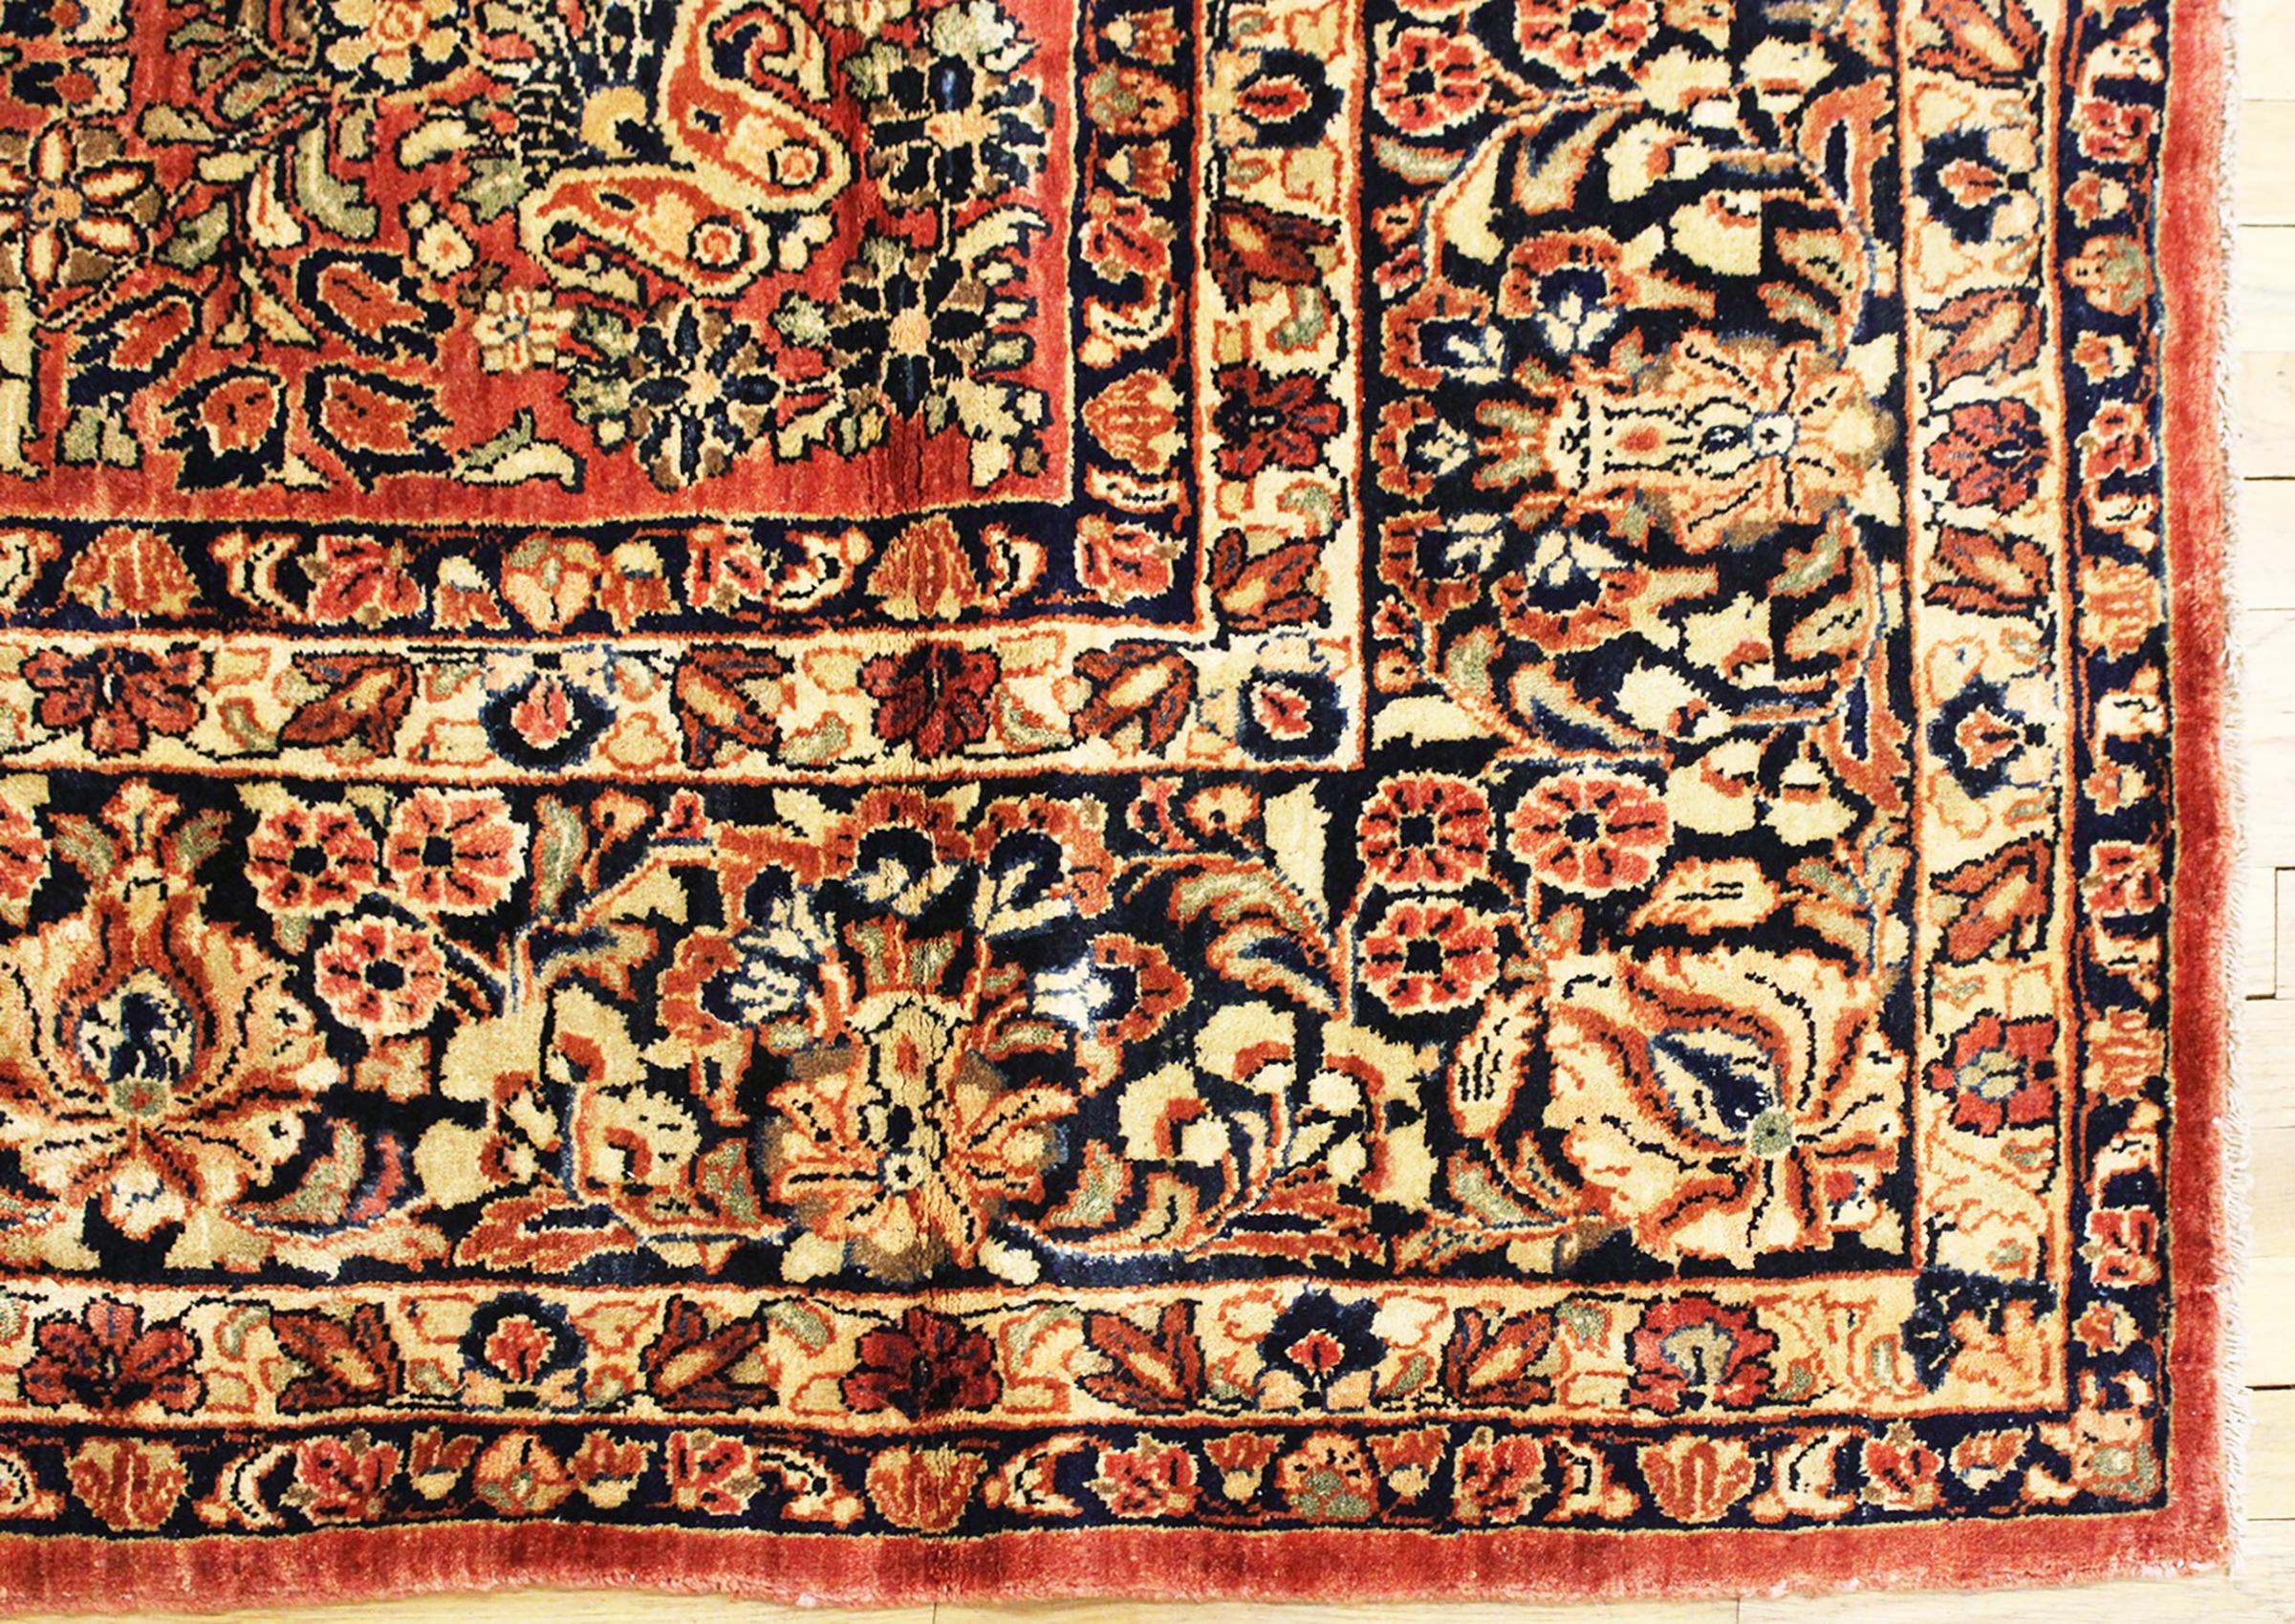 Wool Antique Persian Sarouk Oriental Rug, in Room Size, with Intricate Floral Design For Sale